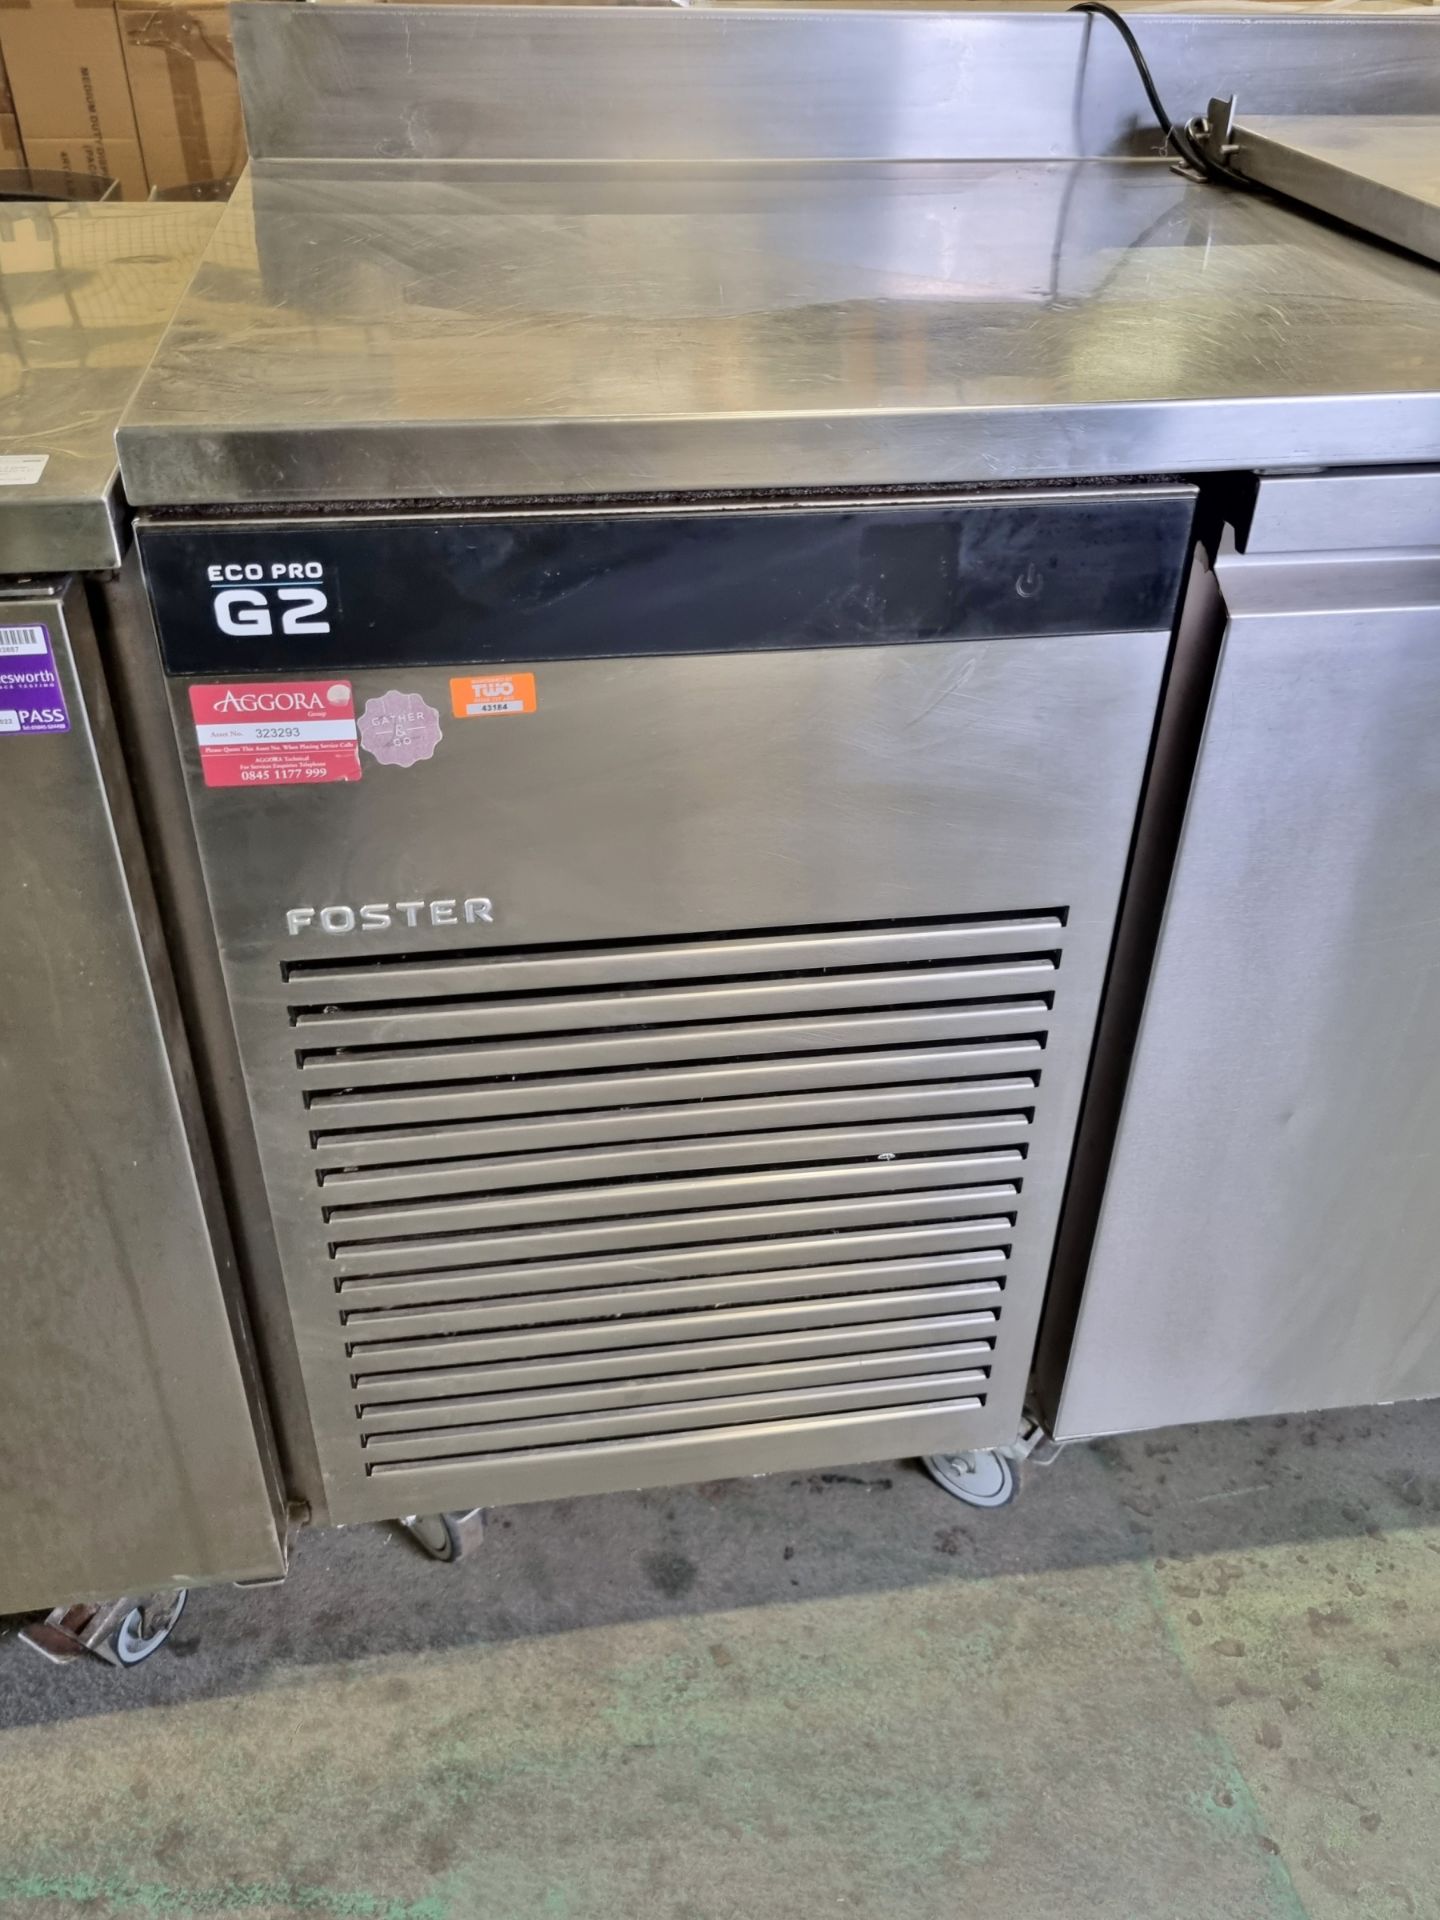 Foster EP1/2H counter fridge - W 1420 x D 720 x H 1010mm - Image 6 of 6